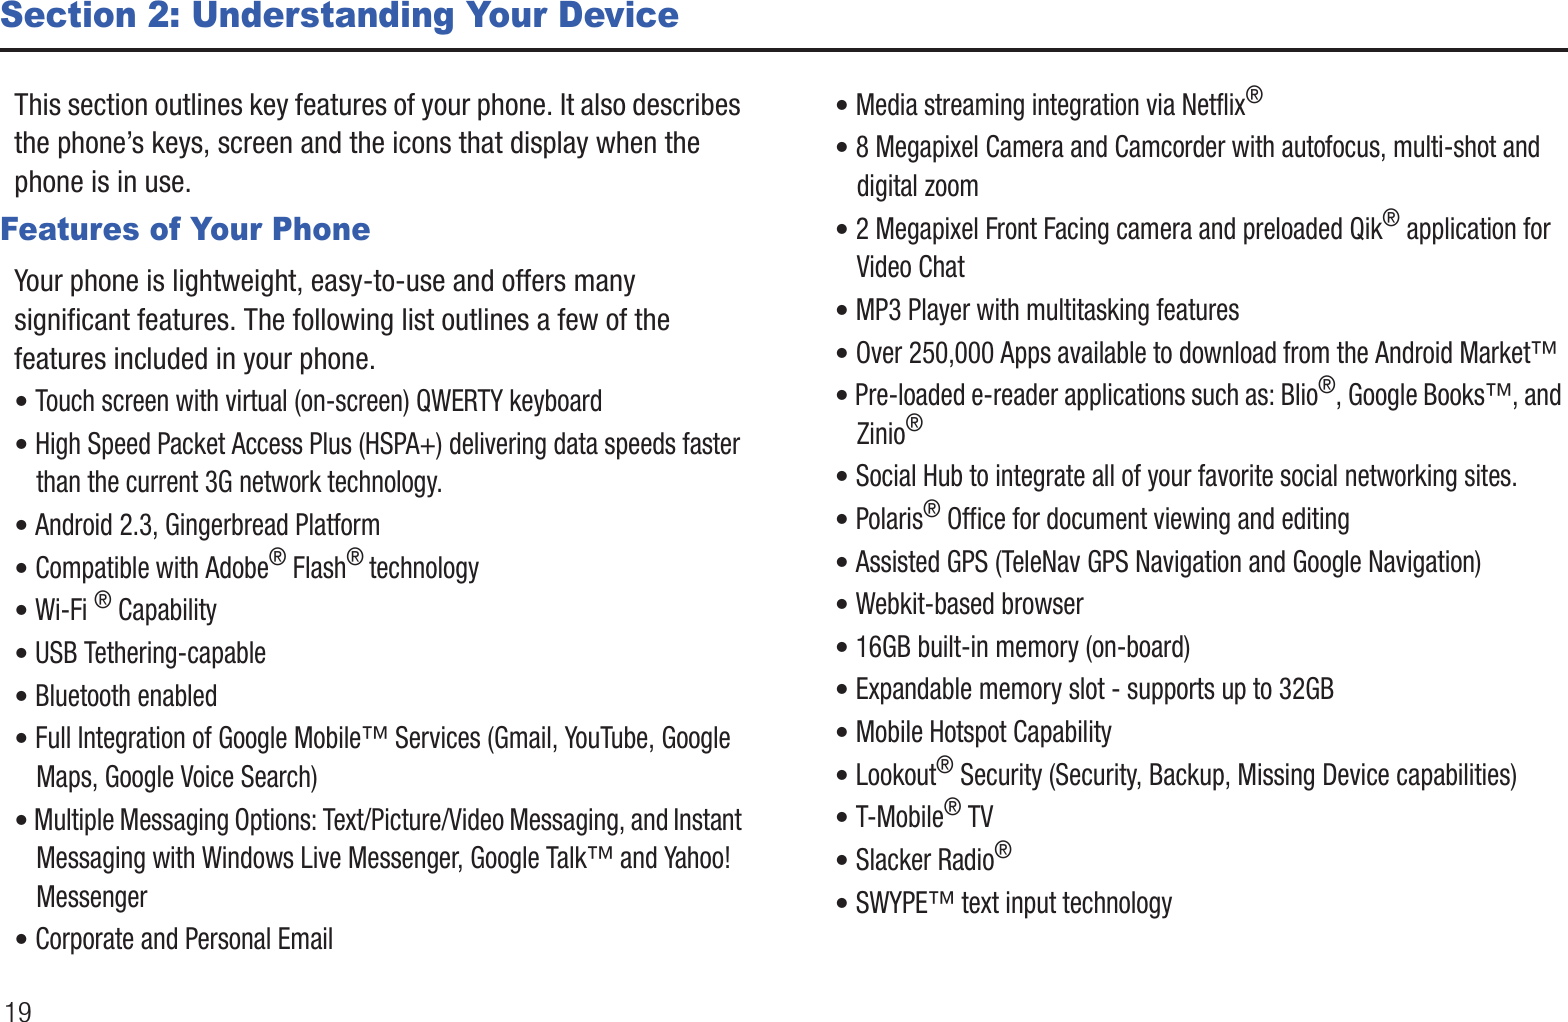 19Section 2: Understanding Your DeviceThis section outlines key features of your phone. It also describes the phone’s keys, screen and the icons that display when the phone is in use.Features of Your PhoneYour phone is lightweight, easy-to-use and offers many significant features. The following list outlines a few of the features included in your phone.• Touch screen with virtual (on-screen) QWERTY keyboard• High Speed Packet Access Plus (HSPA+) delivering data speeds faster than the current 3G network technology.• Android 2.3, Gingerbread Platform• Compatible with Adobe® Flash® technology• Wi-Fi ® Capability• USB Tethering-capable• Bluetooth enabled• Full Integration of Google Mobile™ Services (Gmail, YouTube, Google Maps, Google Voice Search)• Multiple Messaging Options: Text/Picture/Video Messaging, and Instant Messaging with Windows Live Messenger, Google Talk™ and Yahoo! Messenger• Corporate and Personal Email• Media streaming integration via Netflix®• 8 Megapixel Camera and Camcorder with autofocus, multi-shot and digital zoom• 2 Megapixel Front Facing camera and preloaded Qik® application for Video Chat• MP3 Player with multitasking features• Over 250,000 Apps available to download from the Android Market™• Pre-loaded e-reader applications such as: Blio®, Google Books™, and Zinio® • Social Hub to integrate all of your favorite social networking sites.• Polaris® Office for document viewing and editing• Assisted GPS (TeleNav GPS Navigation and Google Navigation)• Webkit-based browser• 16GB built-in memory (on-board)• Expandable memory slot - supports up to 32GB• Mobile Hotspot Capability• Lookout® Security (Security, Backup, Missing Device capabilities)• T-Mobile® TV• Slacker Radio® • SWYPE™ text input technology